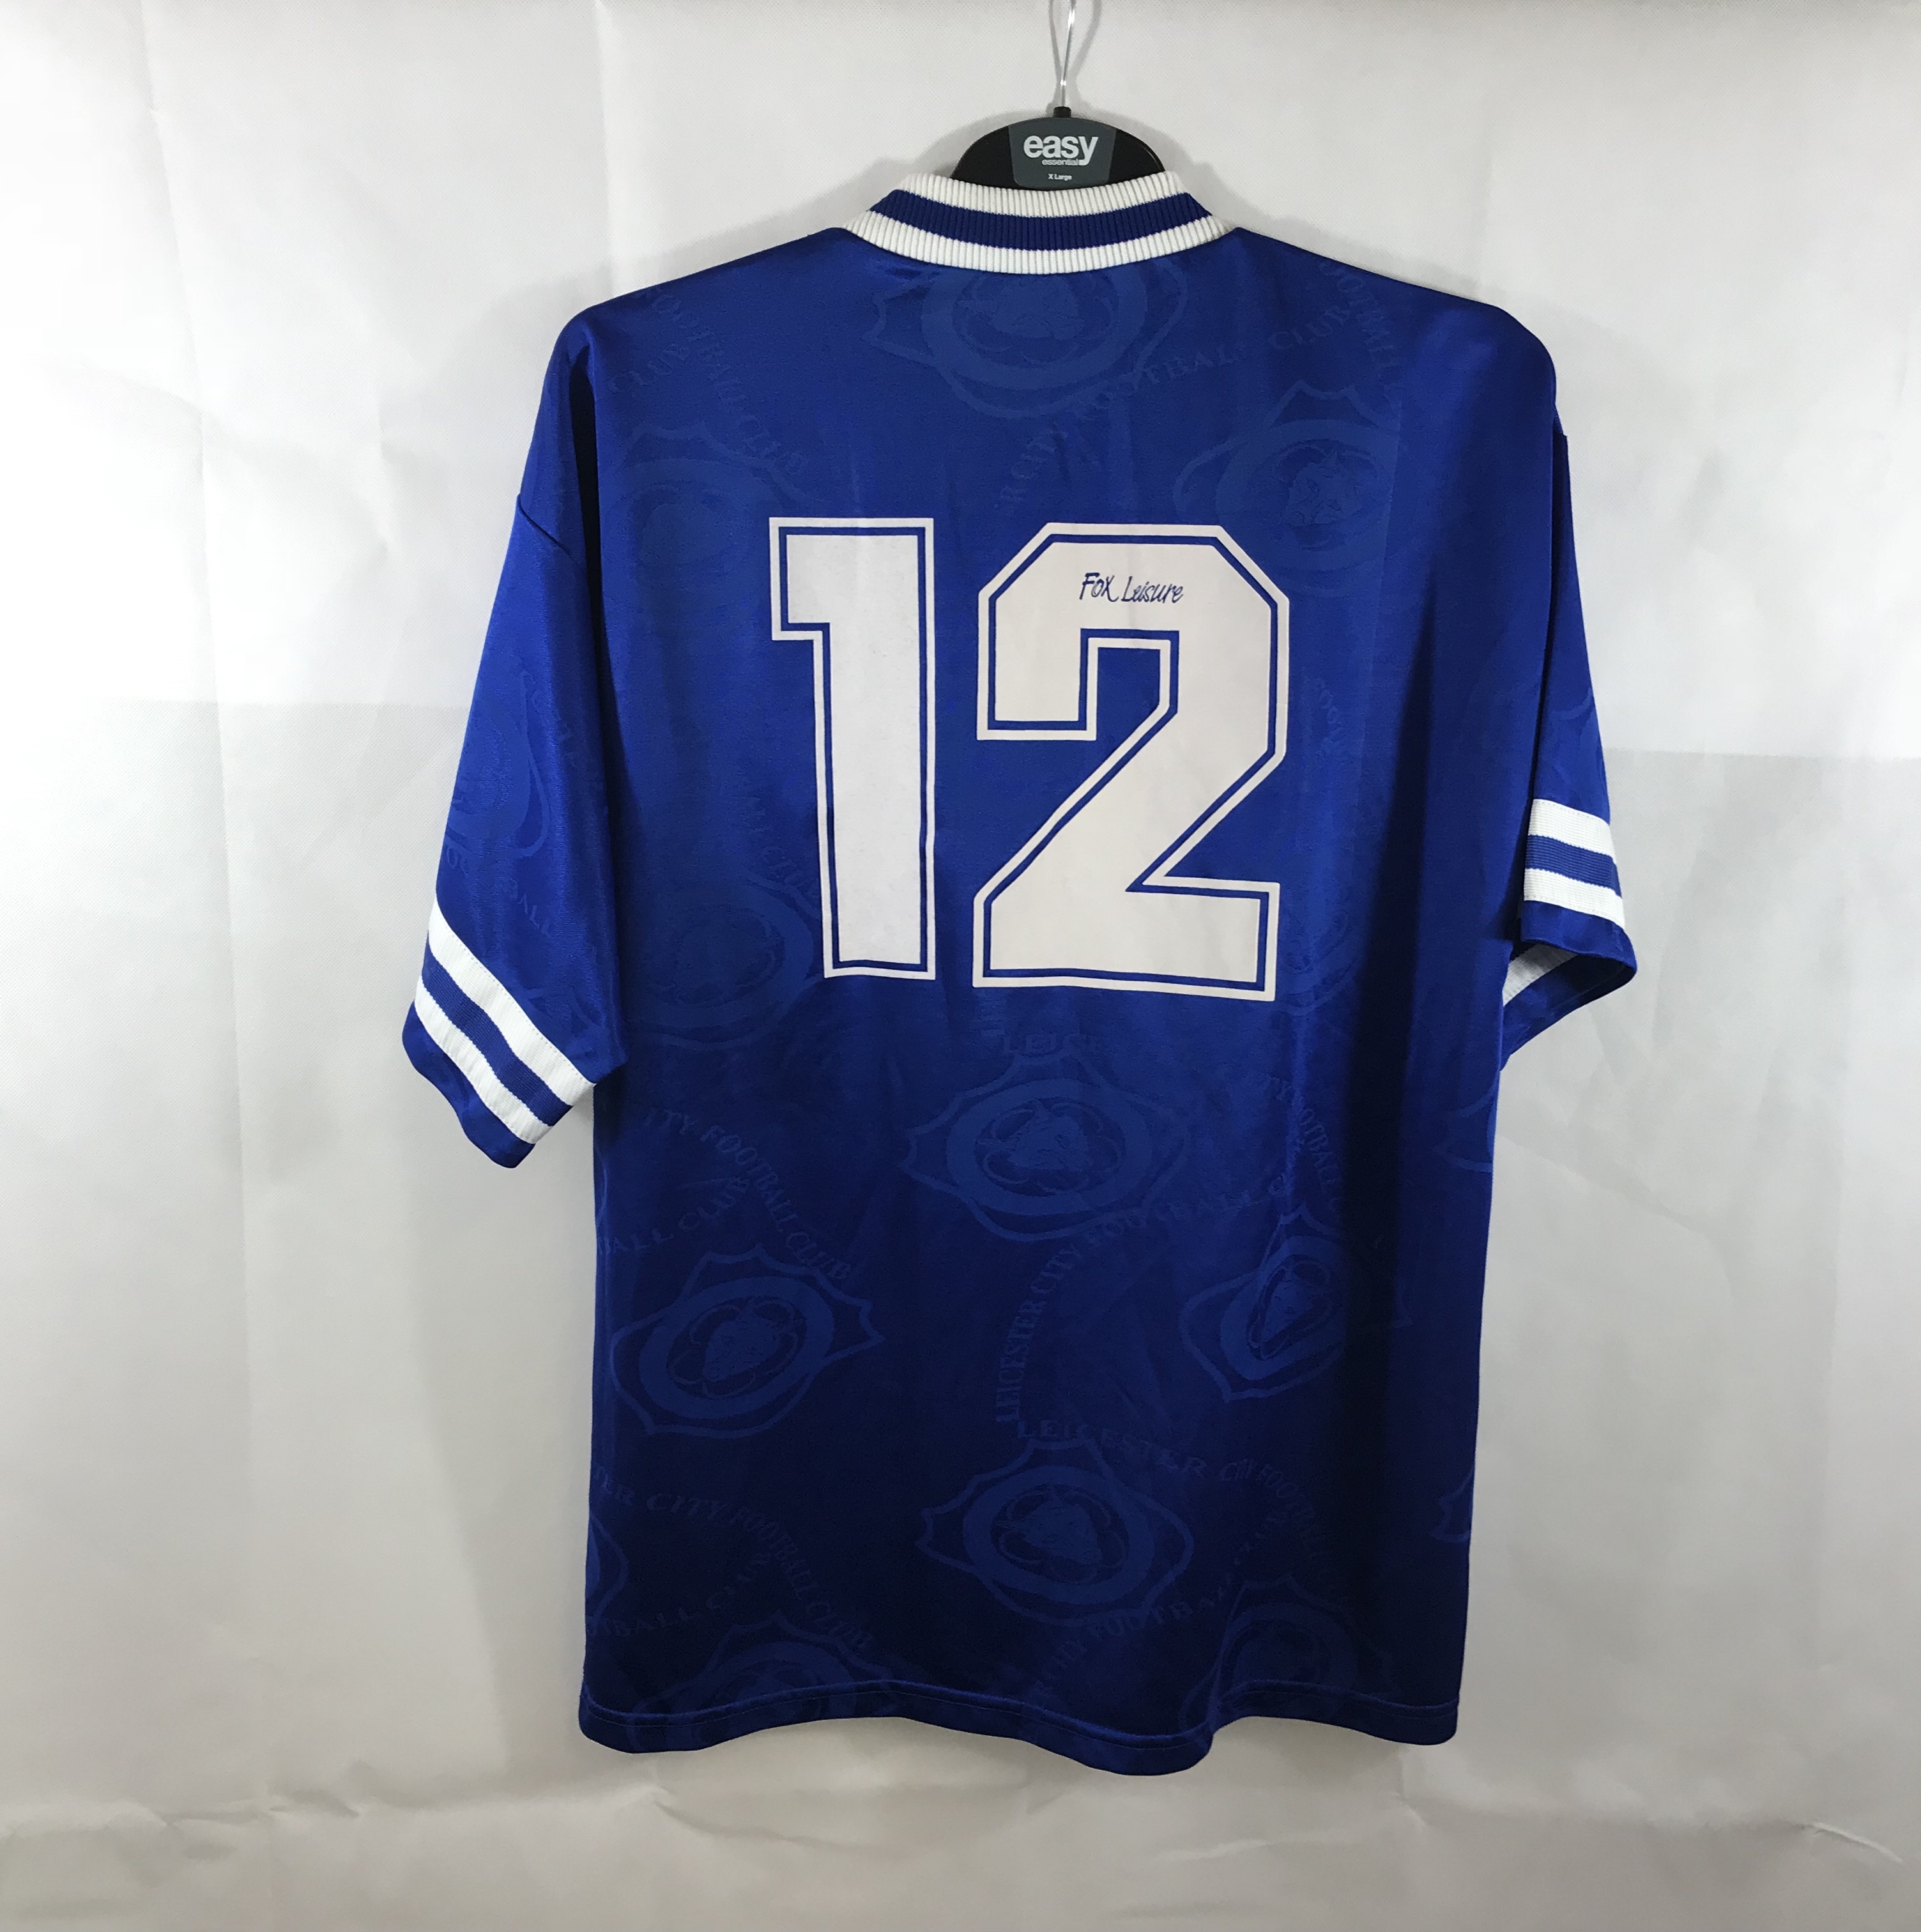 jersey no 12 in football